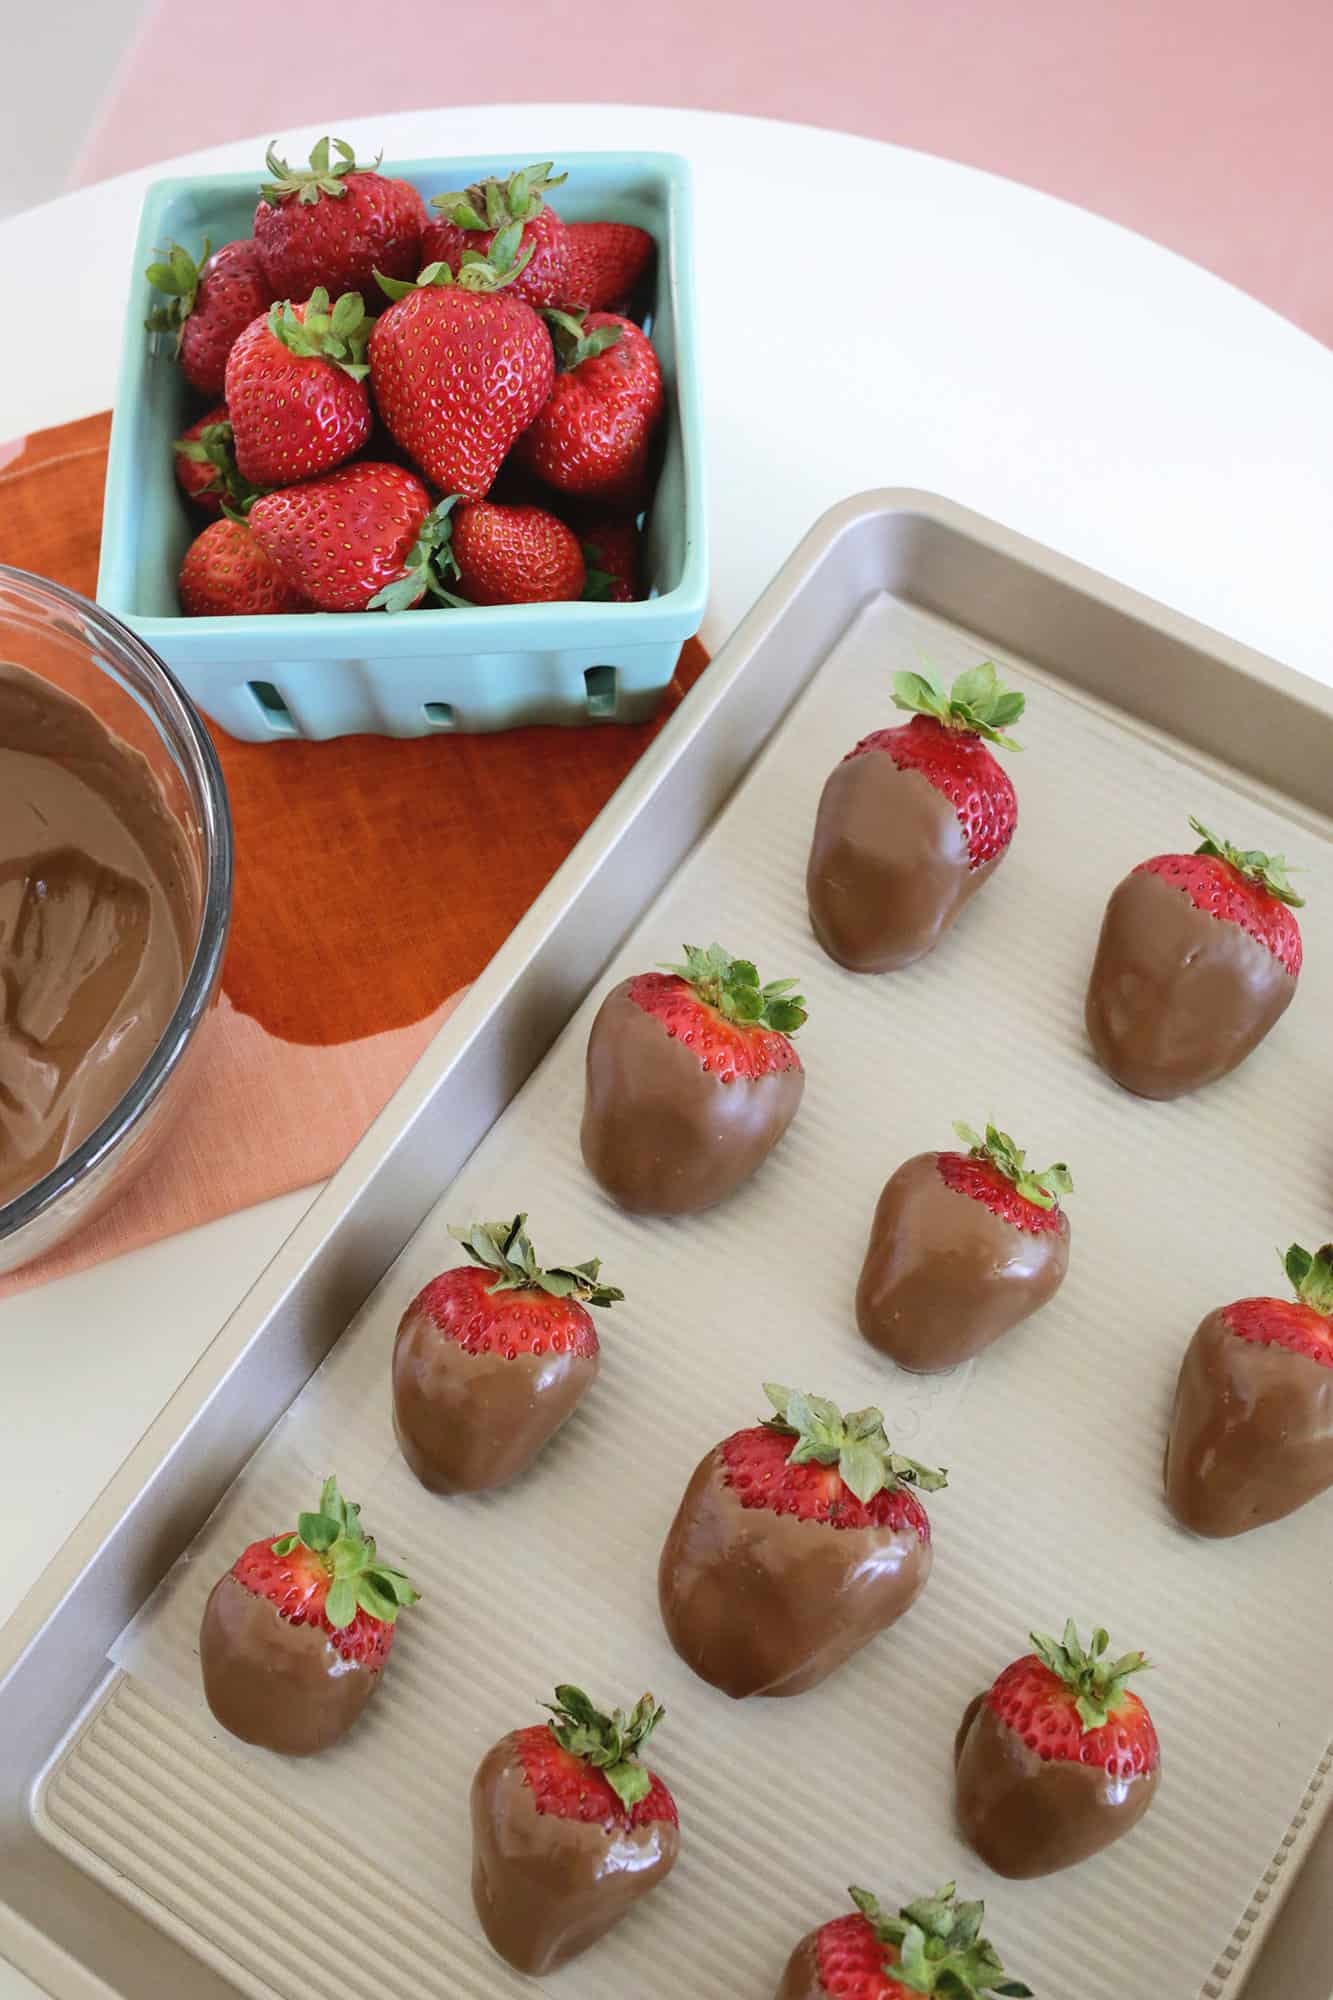 dipped chocolate covered strawberries